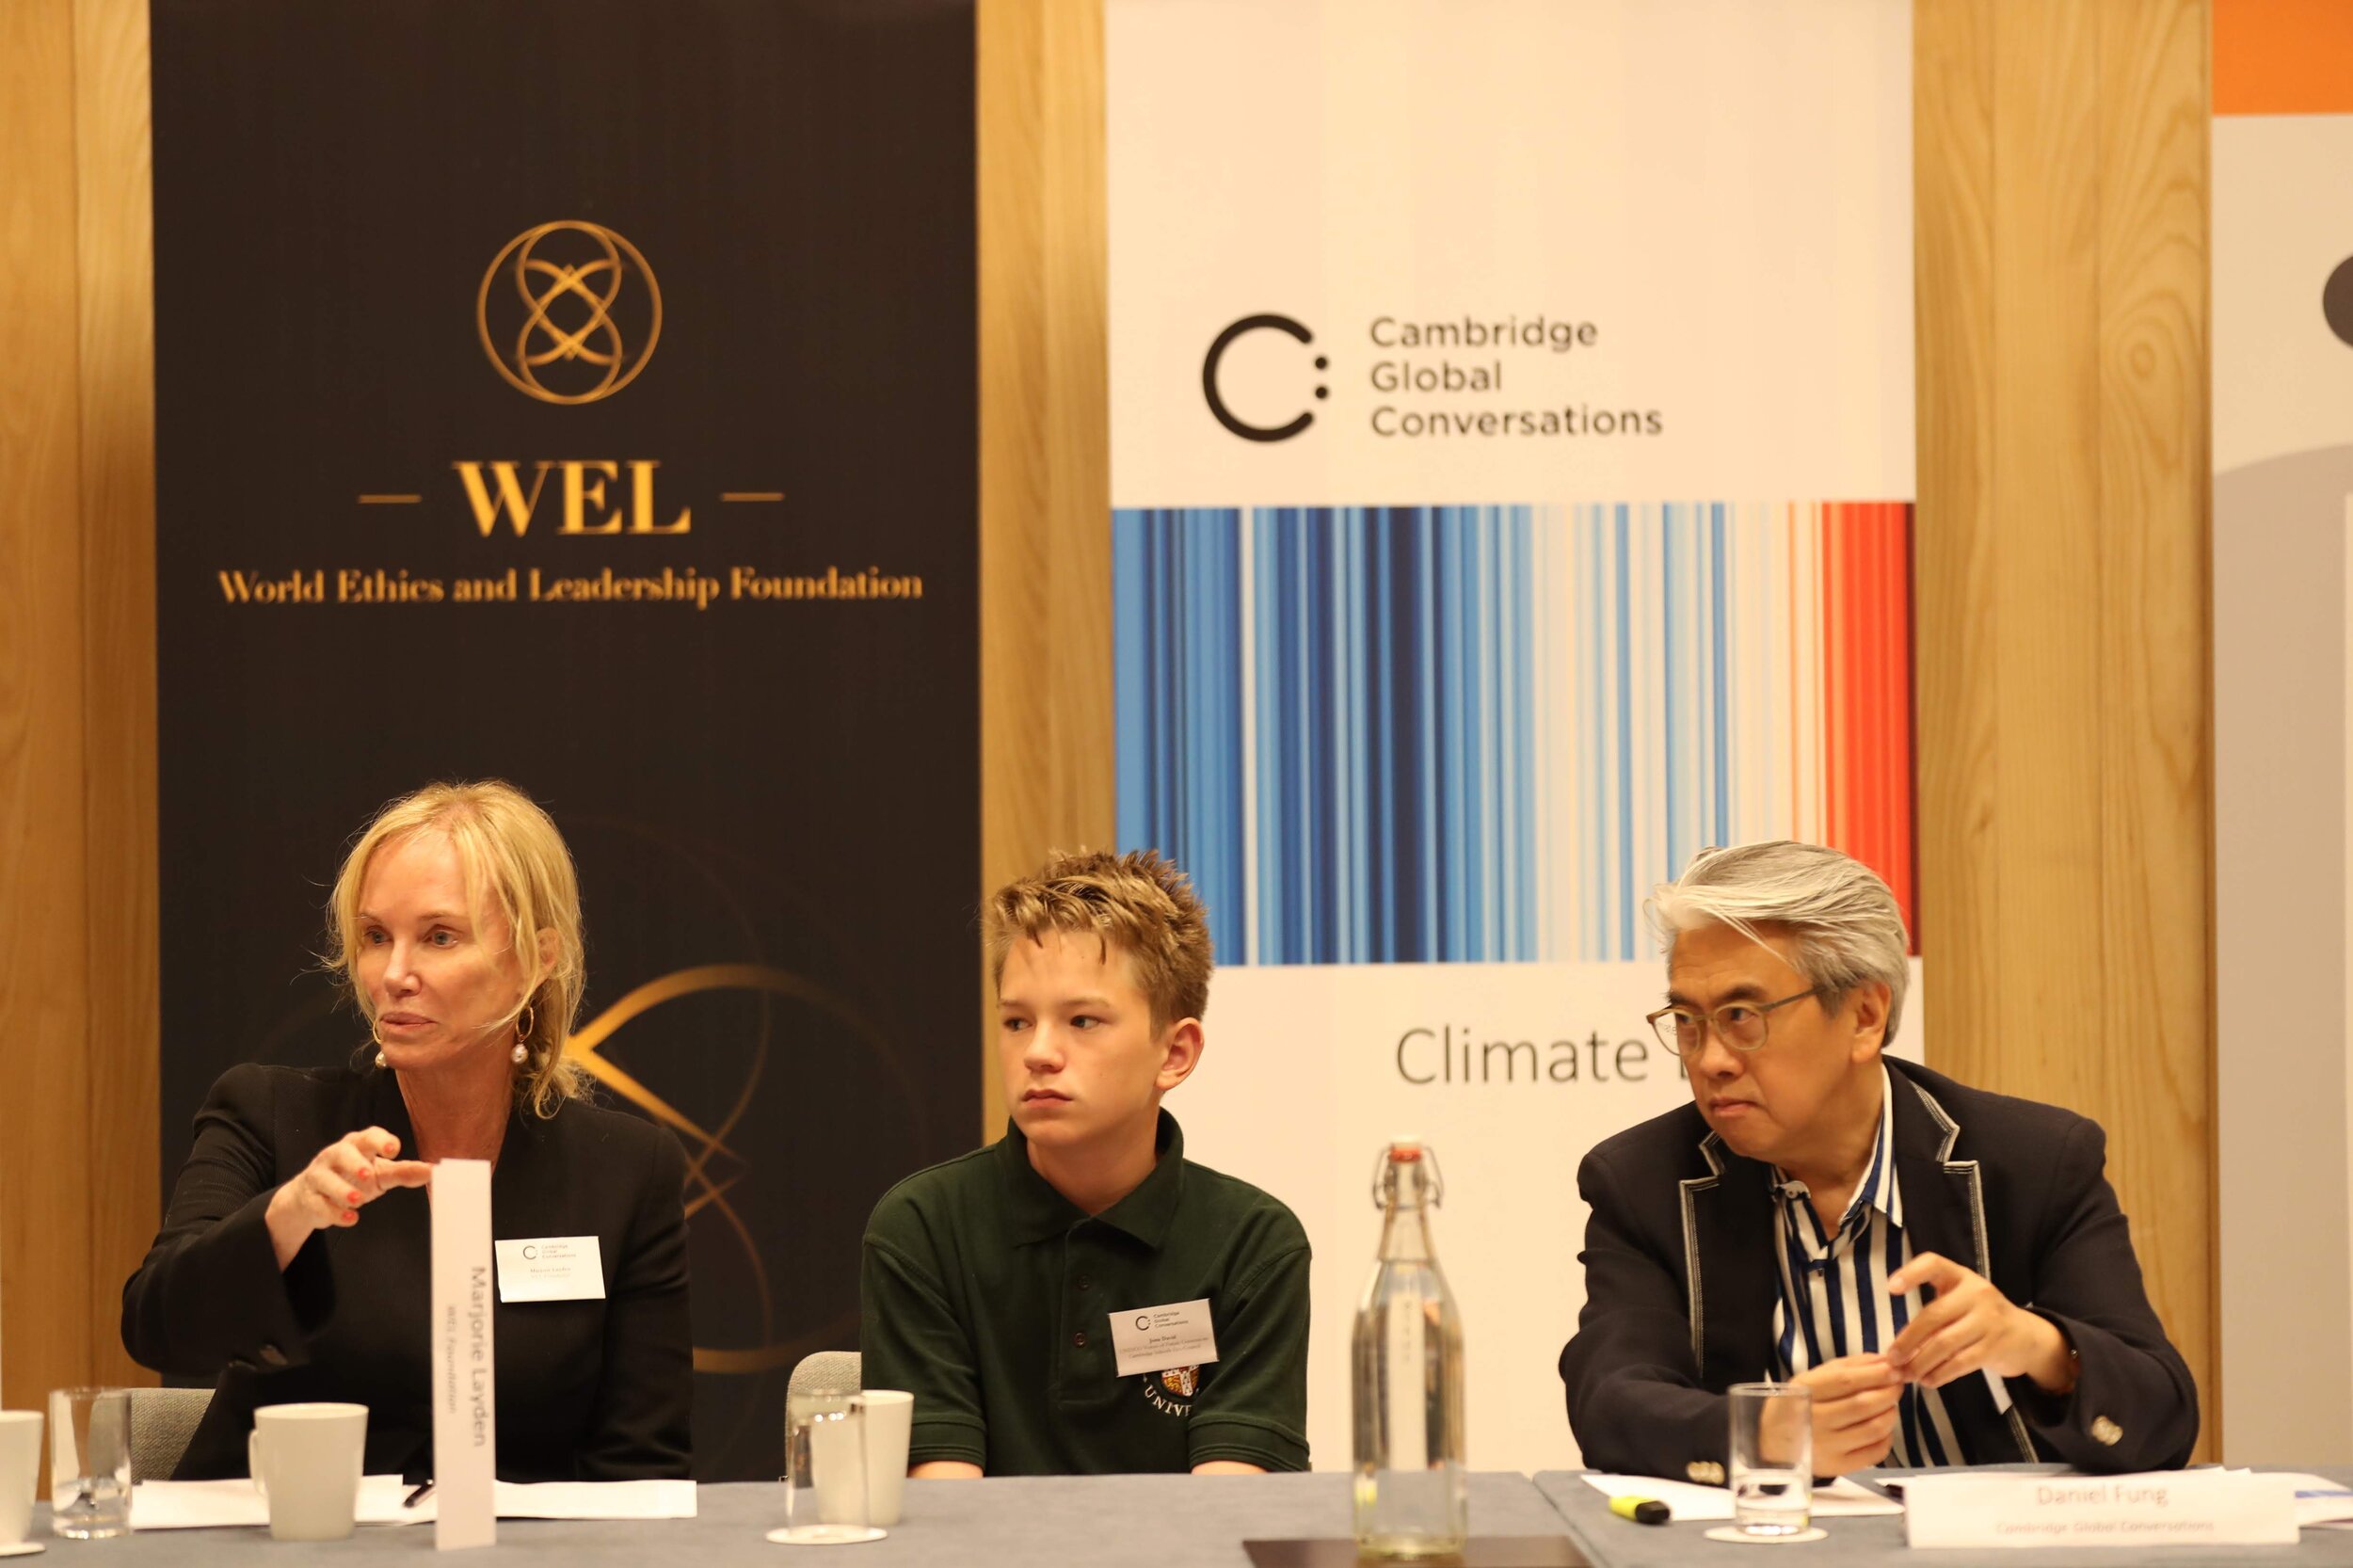   WEL Foundation’s    Marjorie Layden    at CGC: Climate Ethics. Next to her is youth climate strike leader    Jona David   , and CGC Founding Chair    Daniel Fung   .  